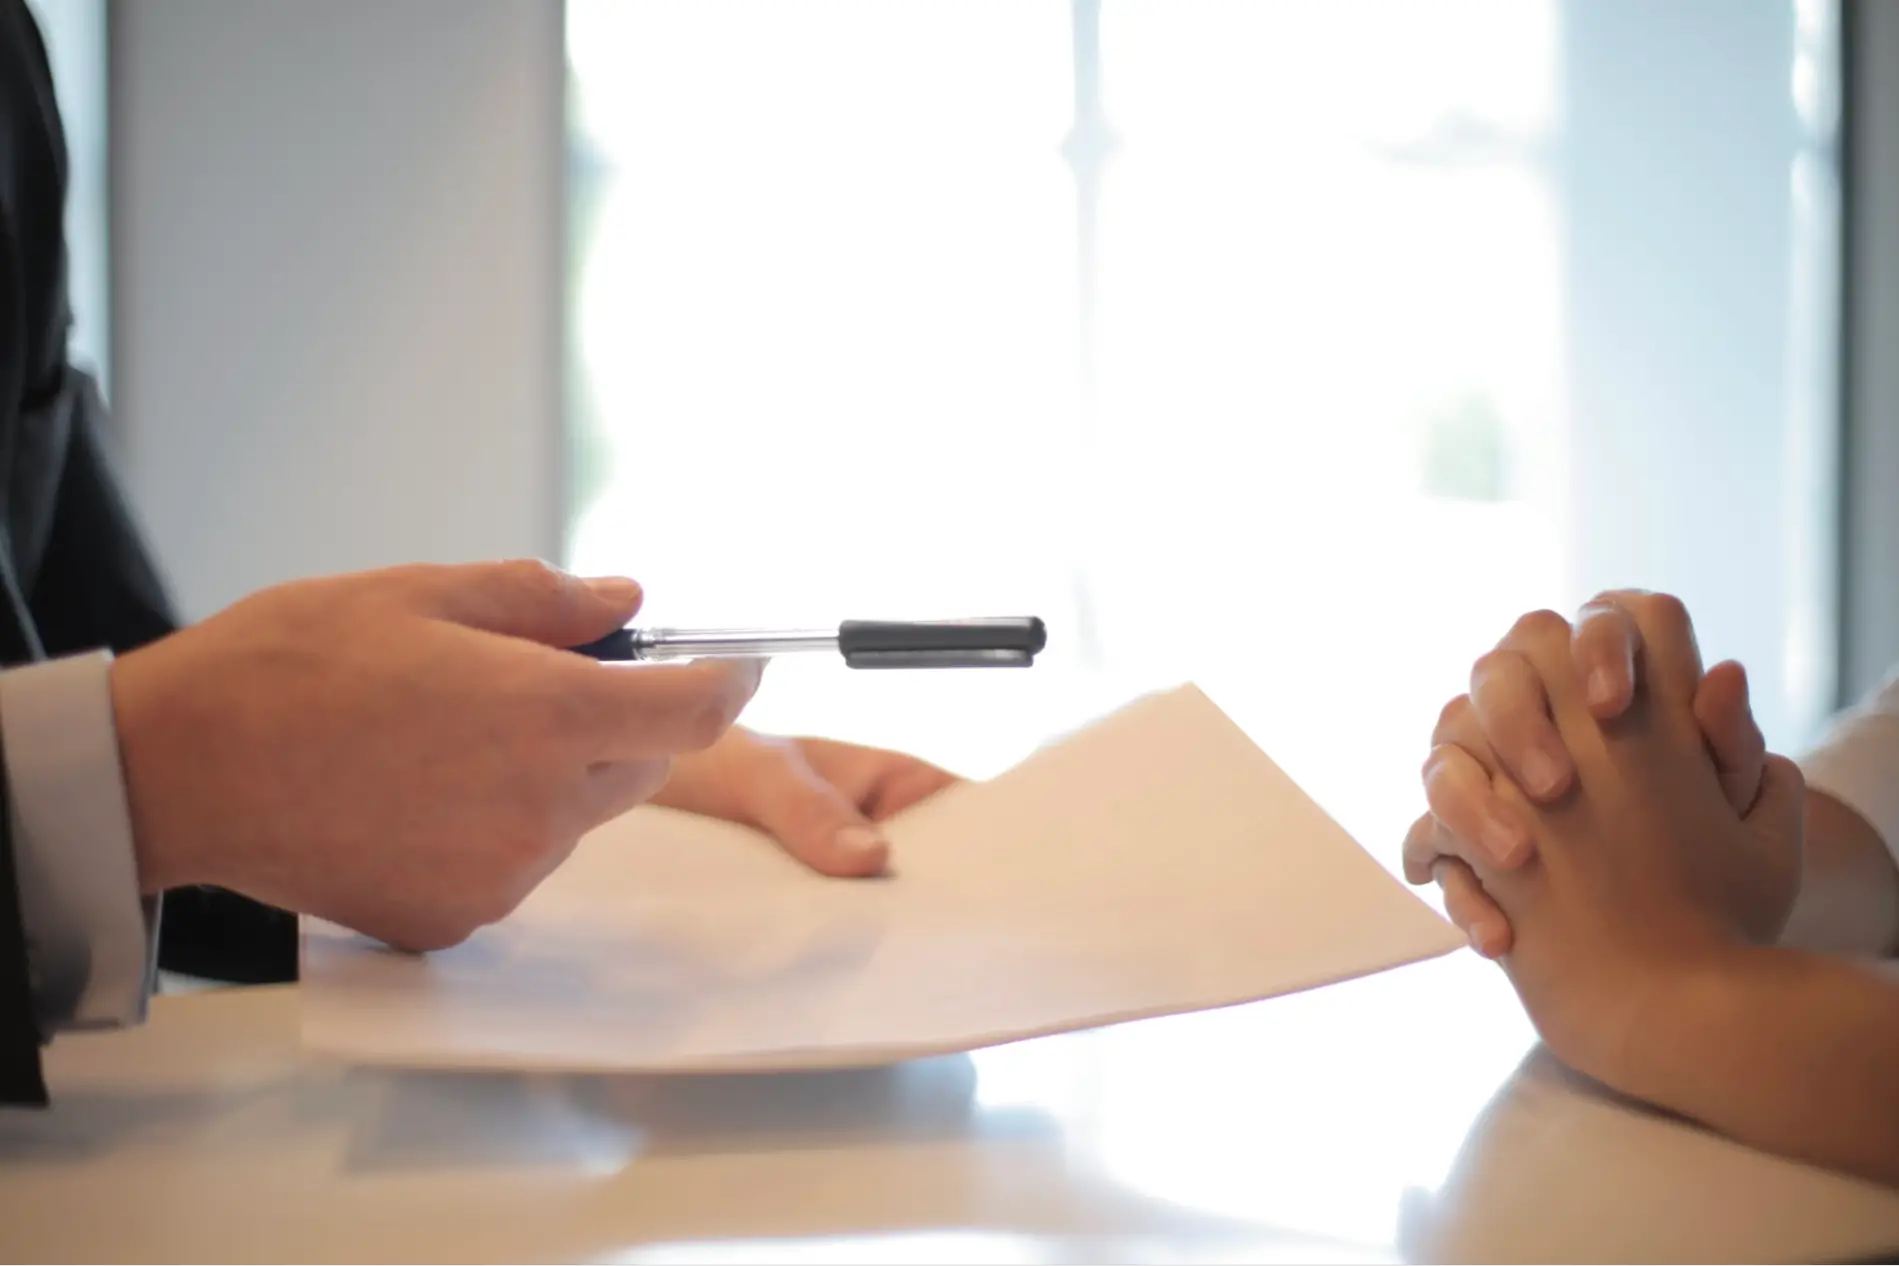 This is an image of a person asking another person to sign legal documents.